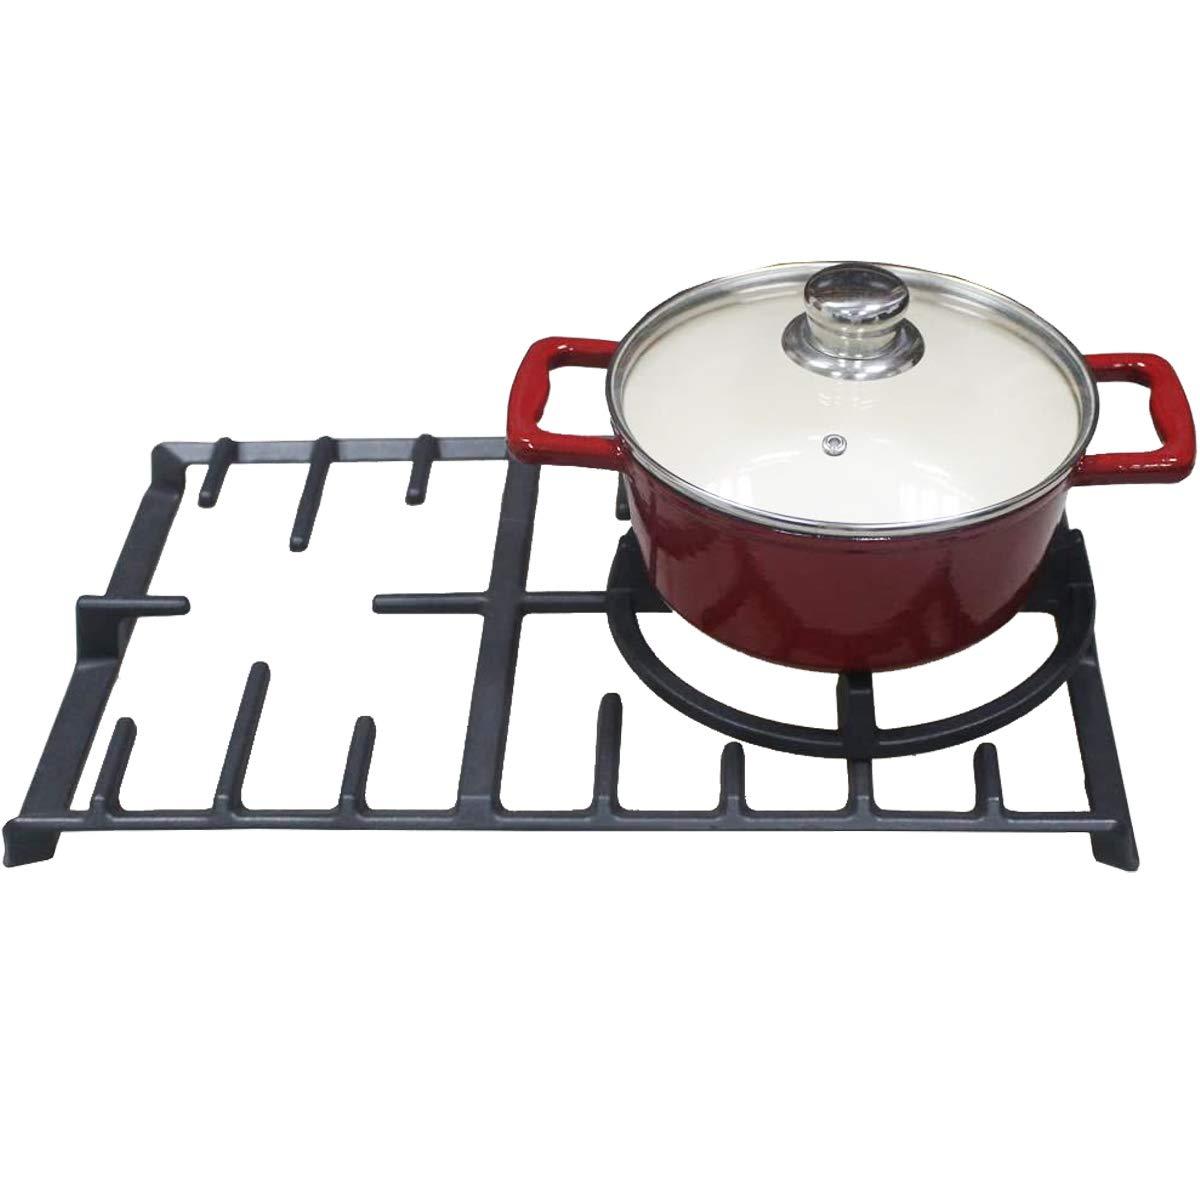 Utheer Cast Iron Wok Support Ring Gas Stove Burner Grate, Universal Non Wok Ring for kitchen Samsung, GE, Frigidaire, Whirlpool, KitchenAid Etc, Gas Stove Accessories, 9 Inch - CookCave